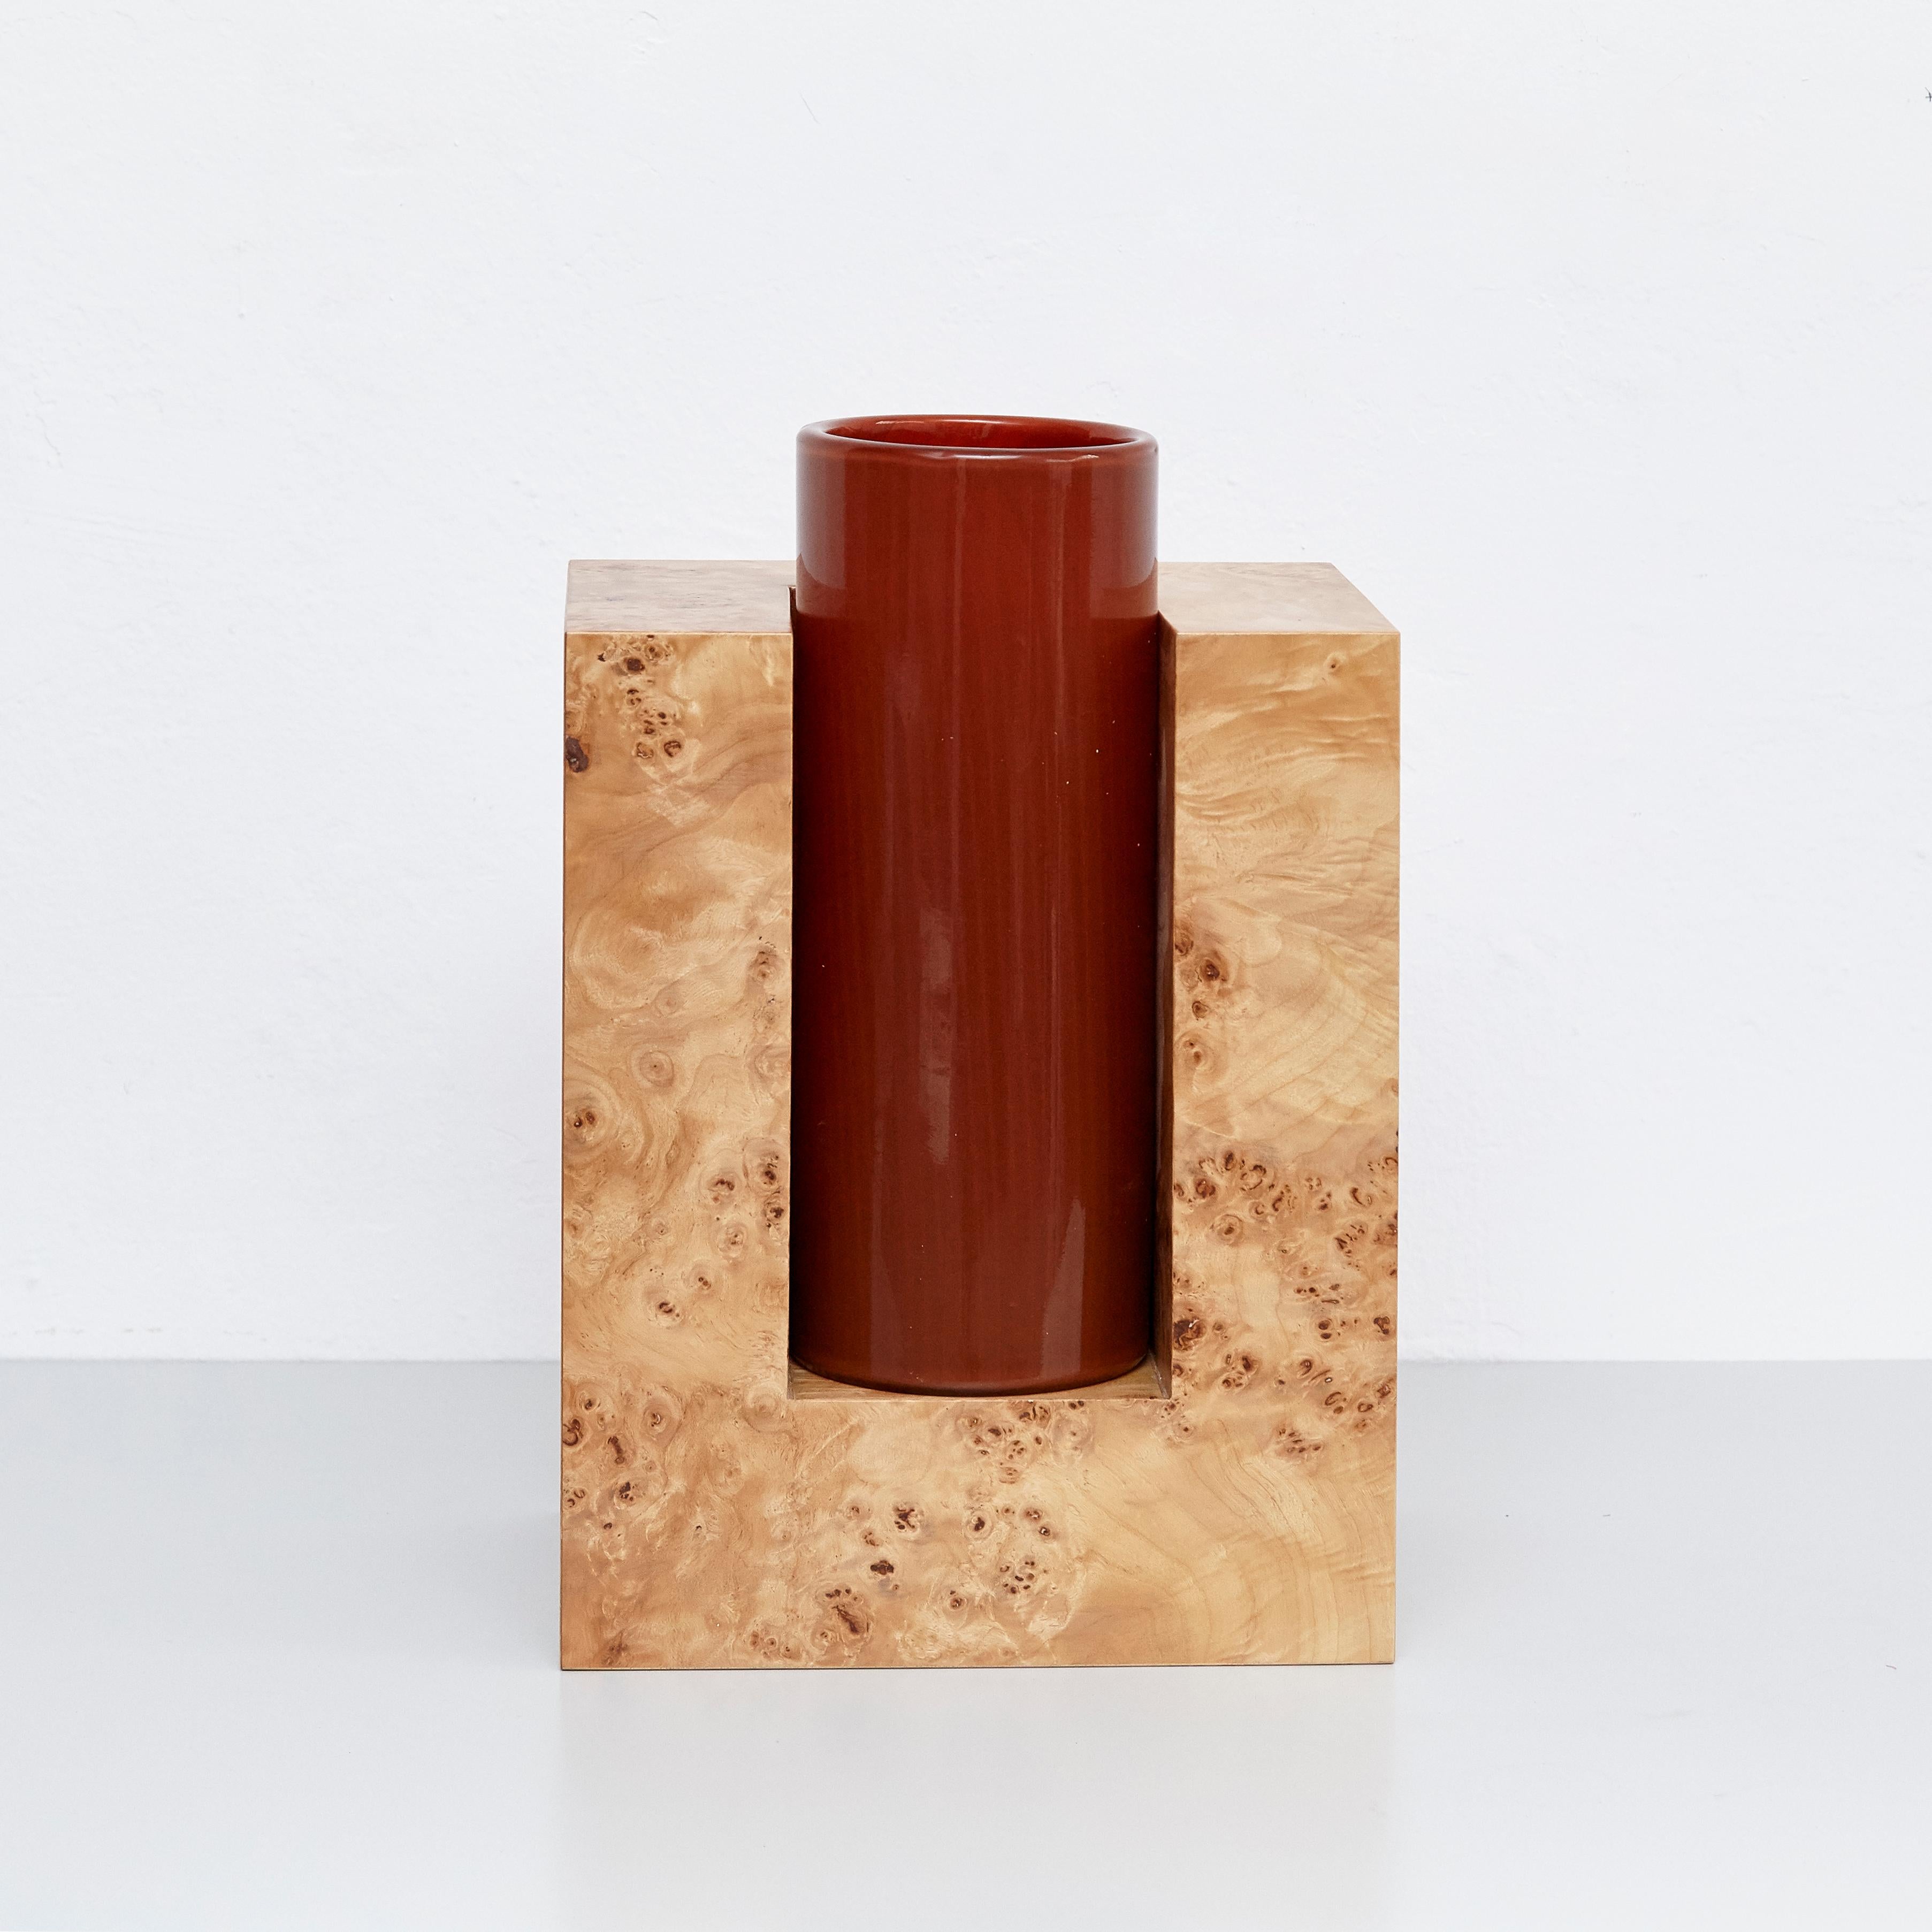 Y vase made for the collection of twenty-seven woods for Chinese artificial flowers vase by Ettore Sottsass,
Edited by Design Gallery Milano, 1995.

Limited edition of 12 numbered pieces, number 9 / 12.

In good original condition, with minor